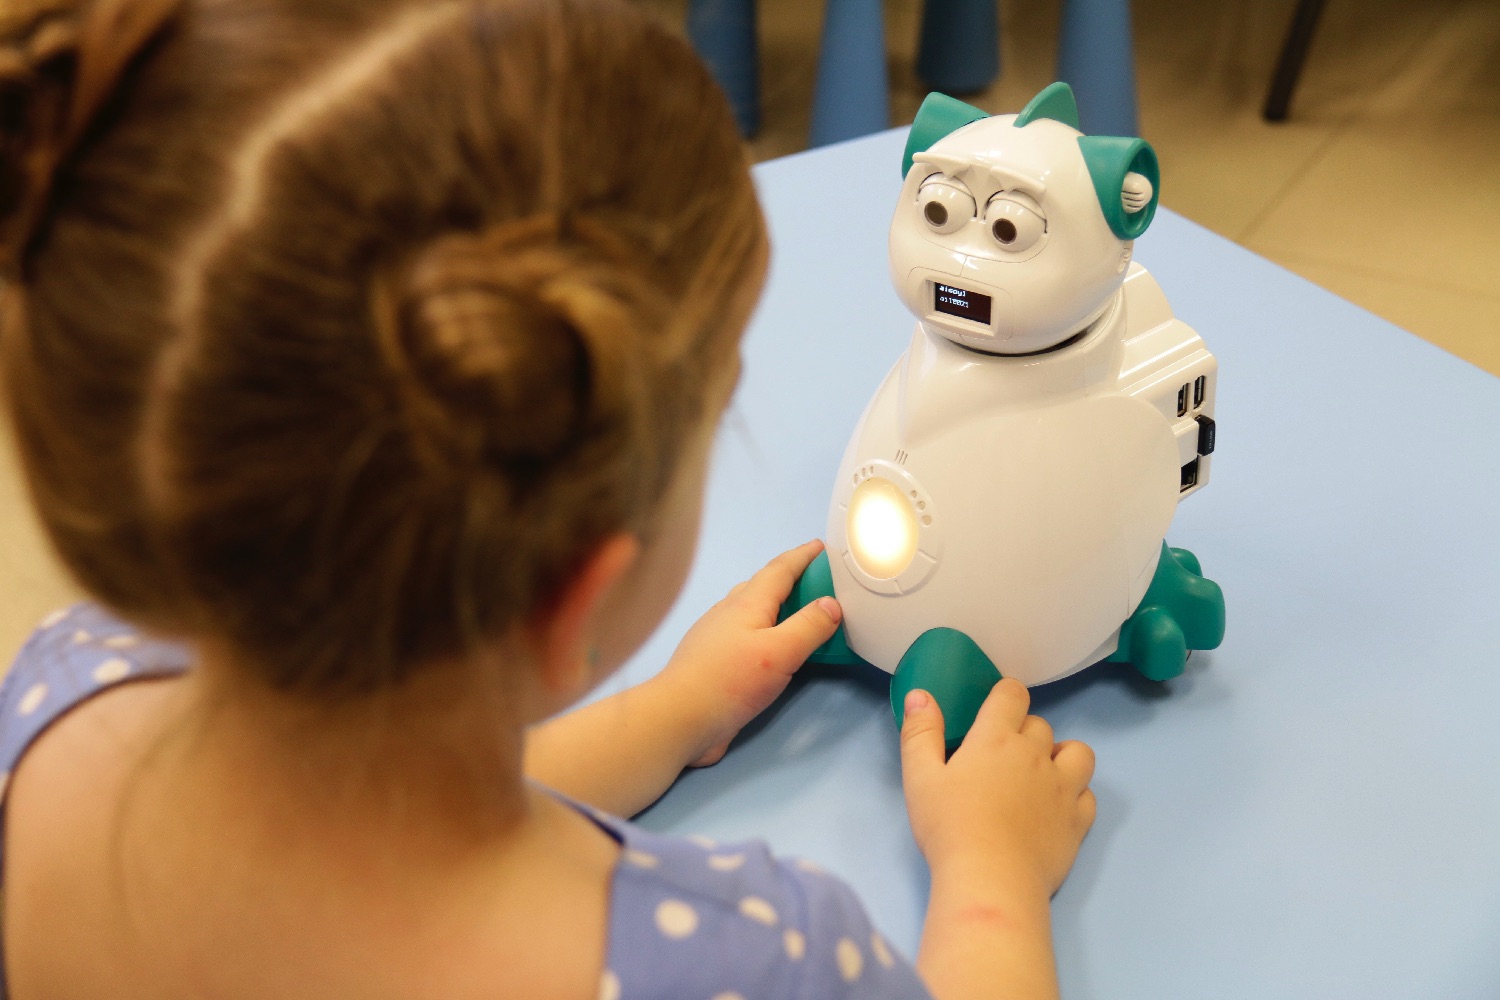 robot could help kids with autism mg 1014